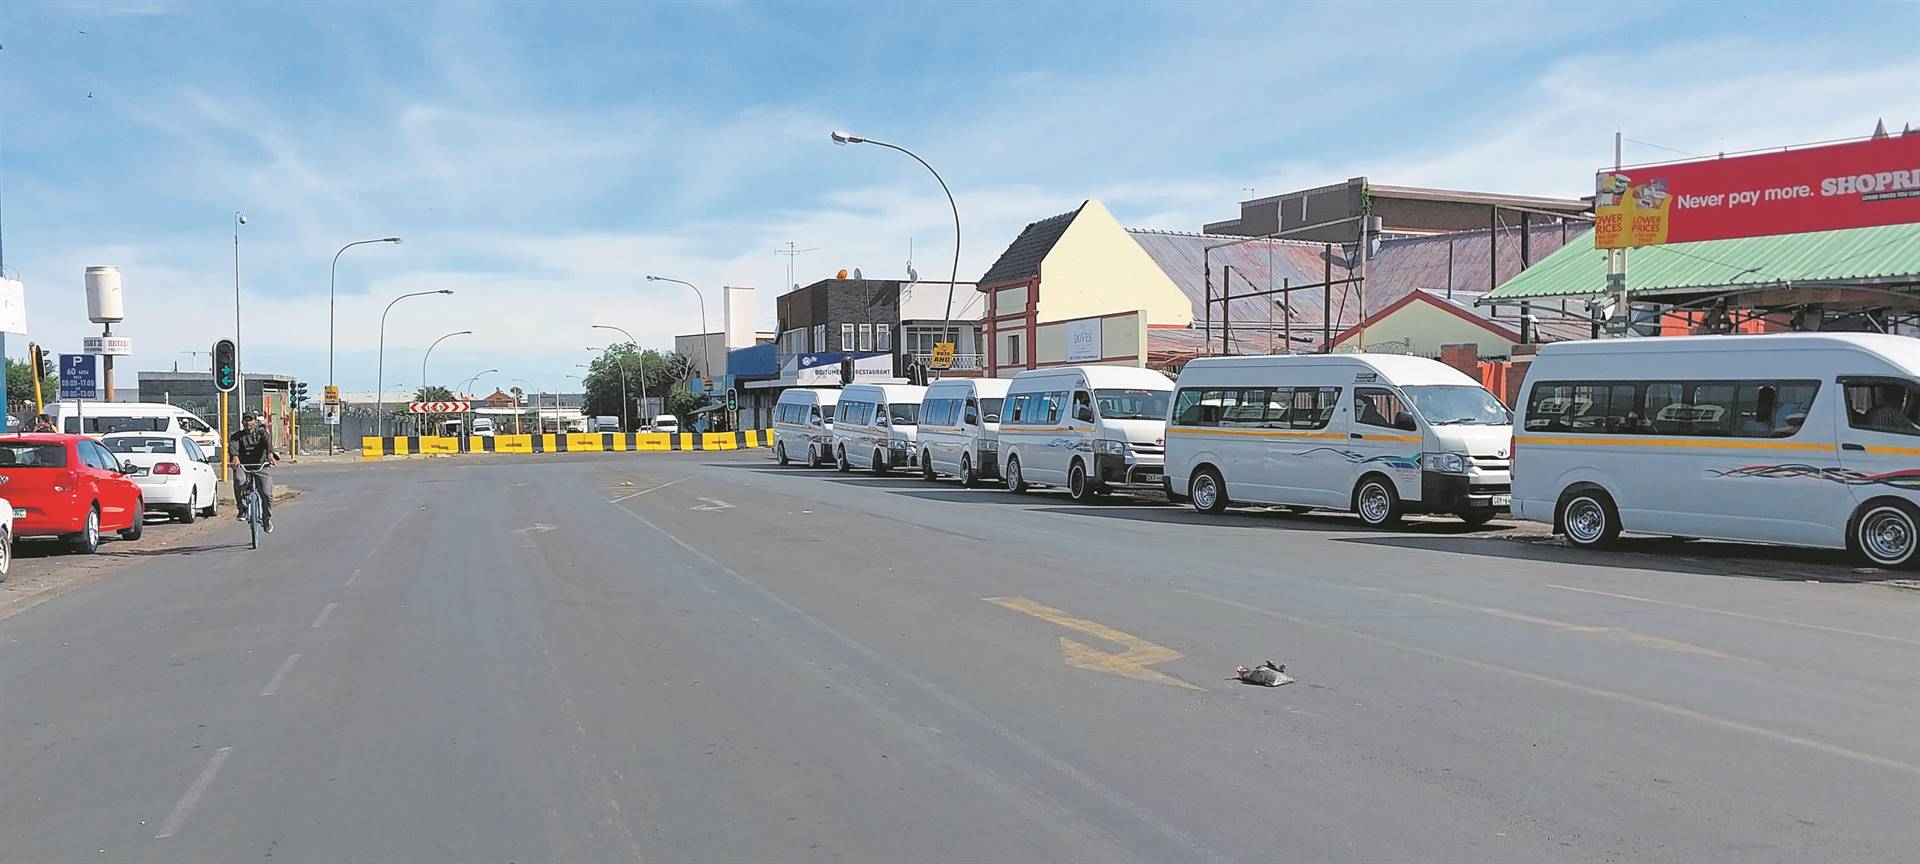 More than 500 minibus taxis to leave Western Cape to drop off passengers in the Eastern Cape for the festive season.